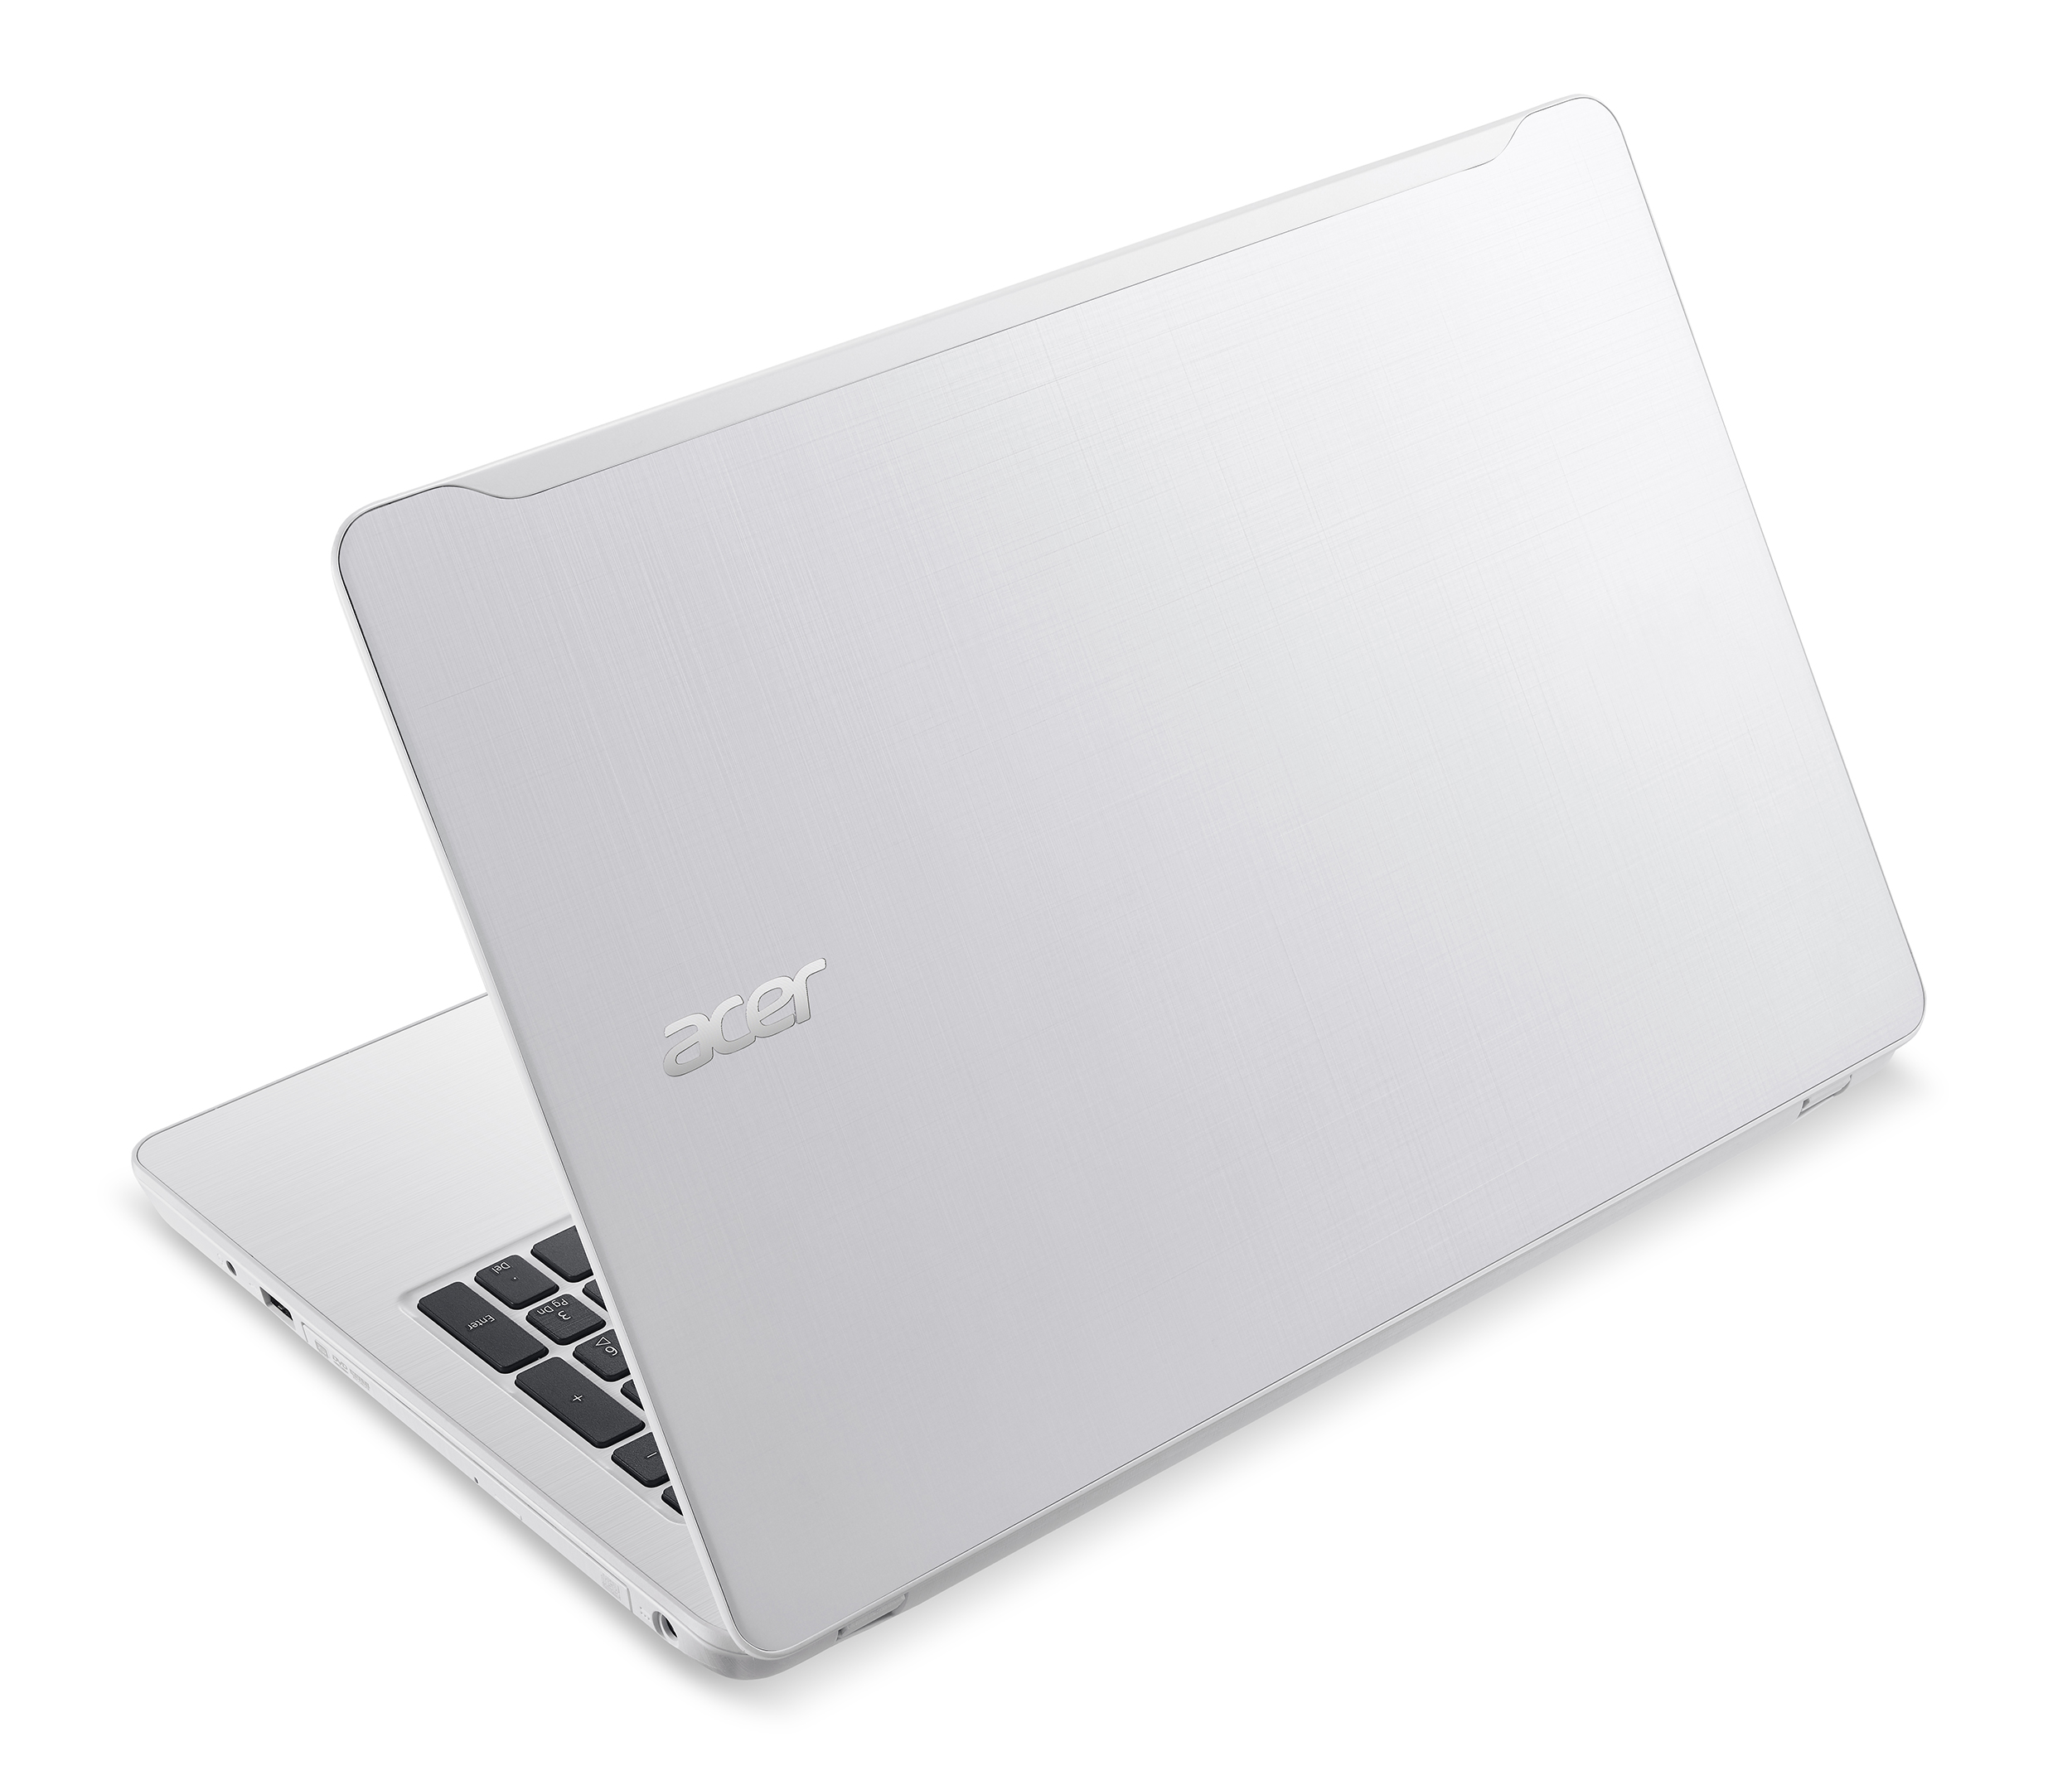 The Aspire F 15 with Windows 10